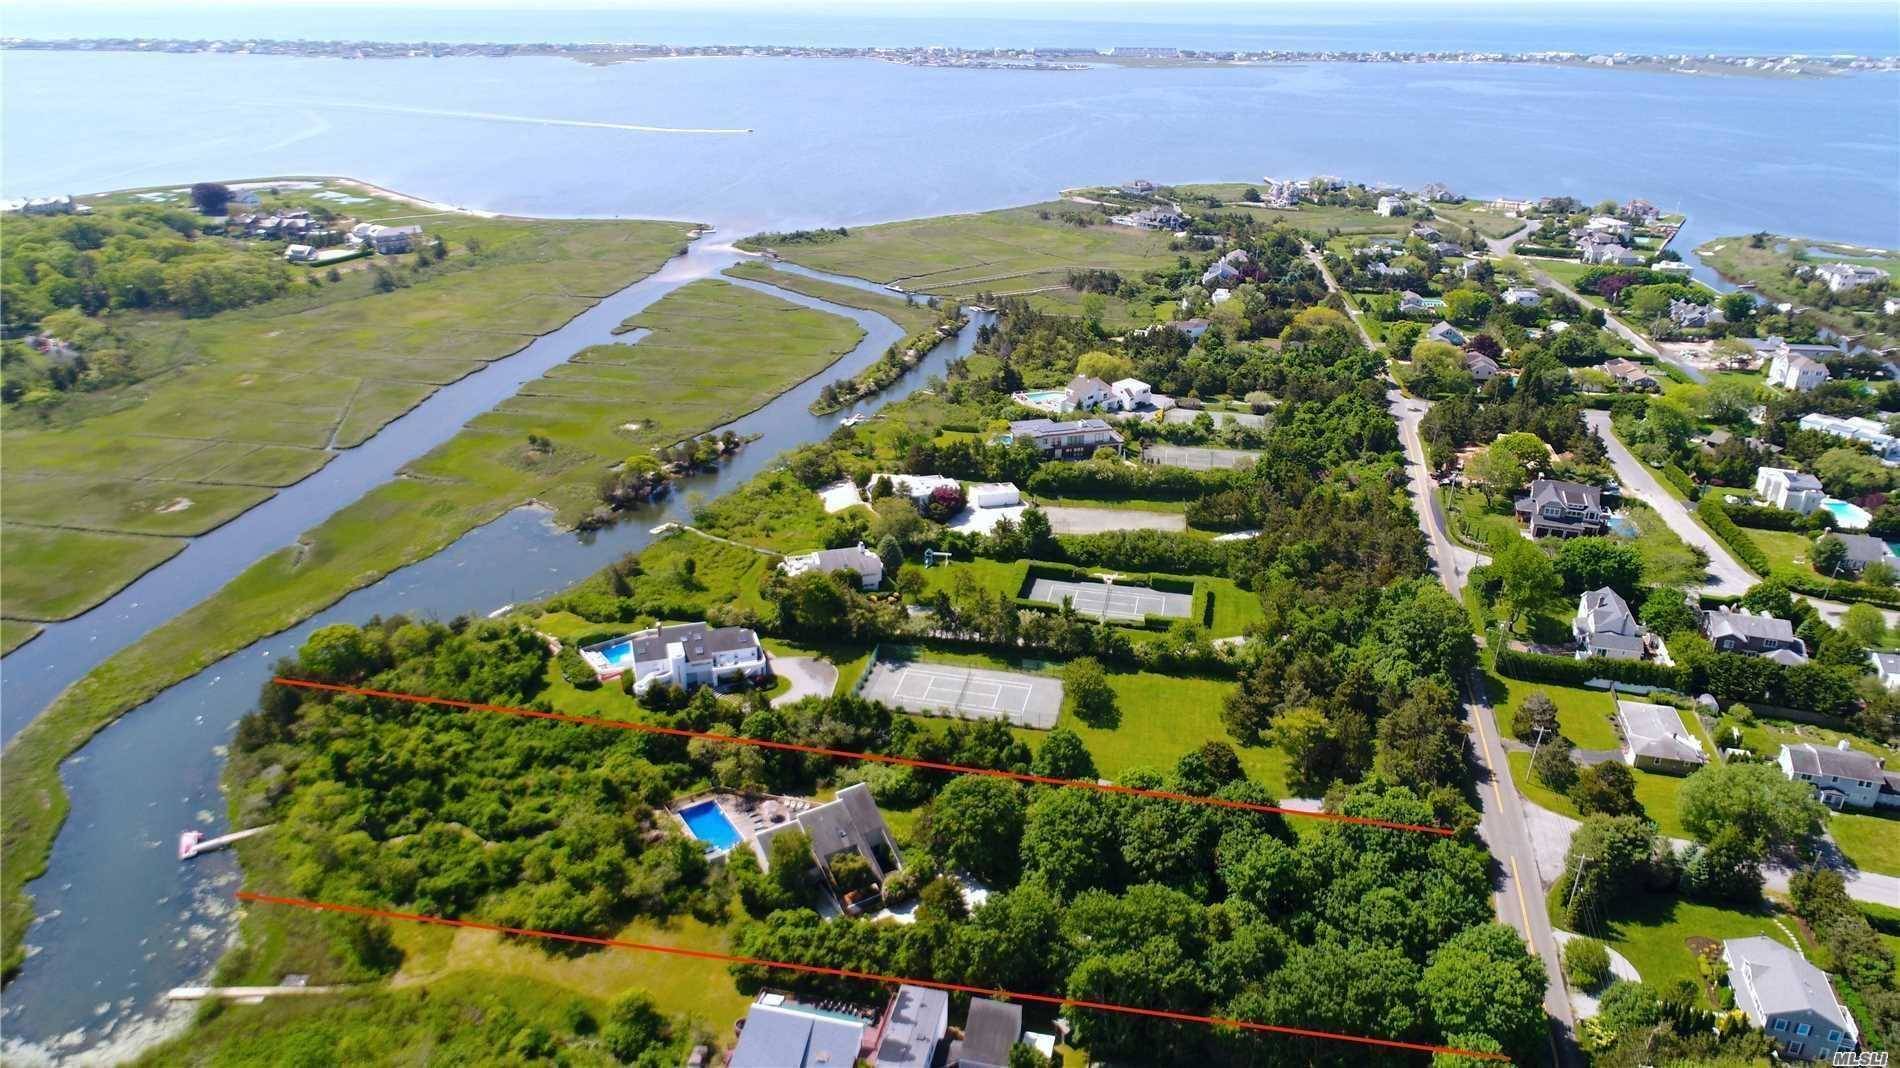 2. 3 acres of prime waterfront property on the canal with 169' of water frontage and existing private dock.